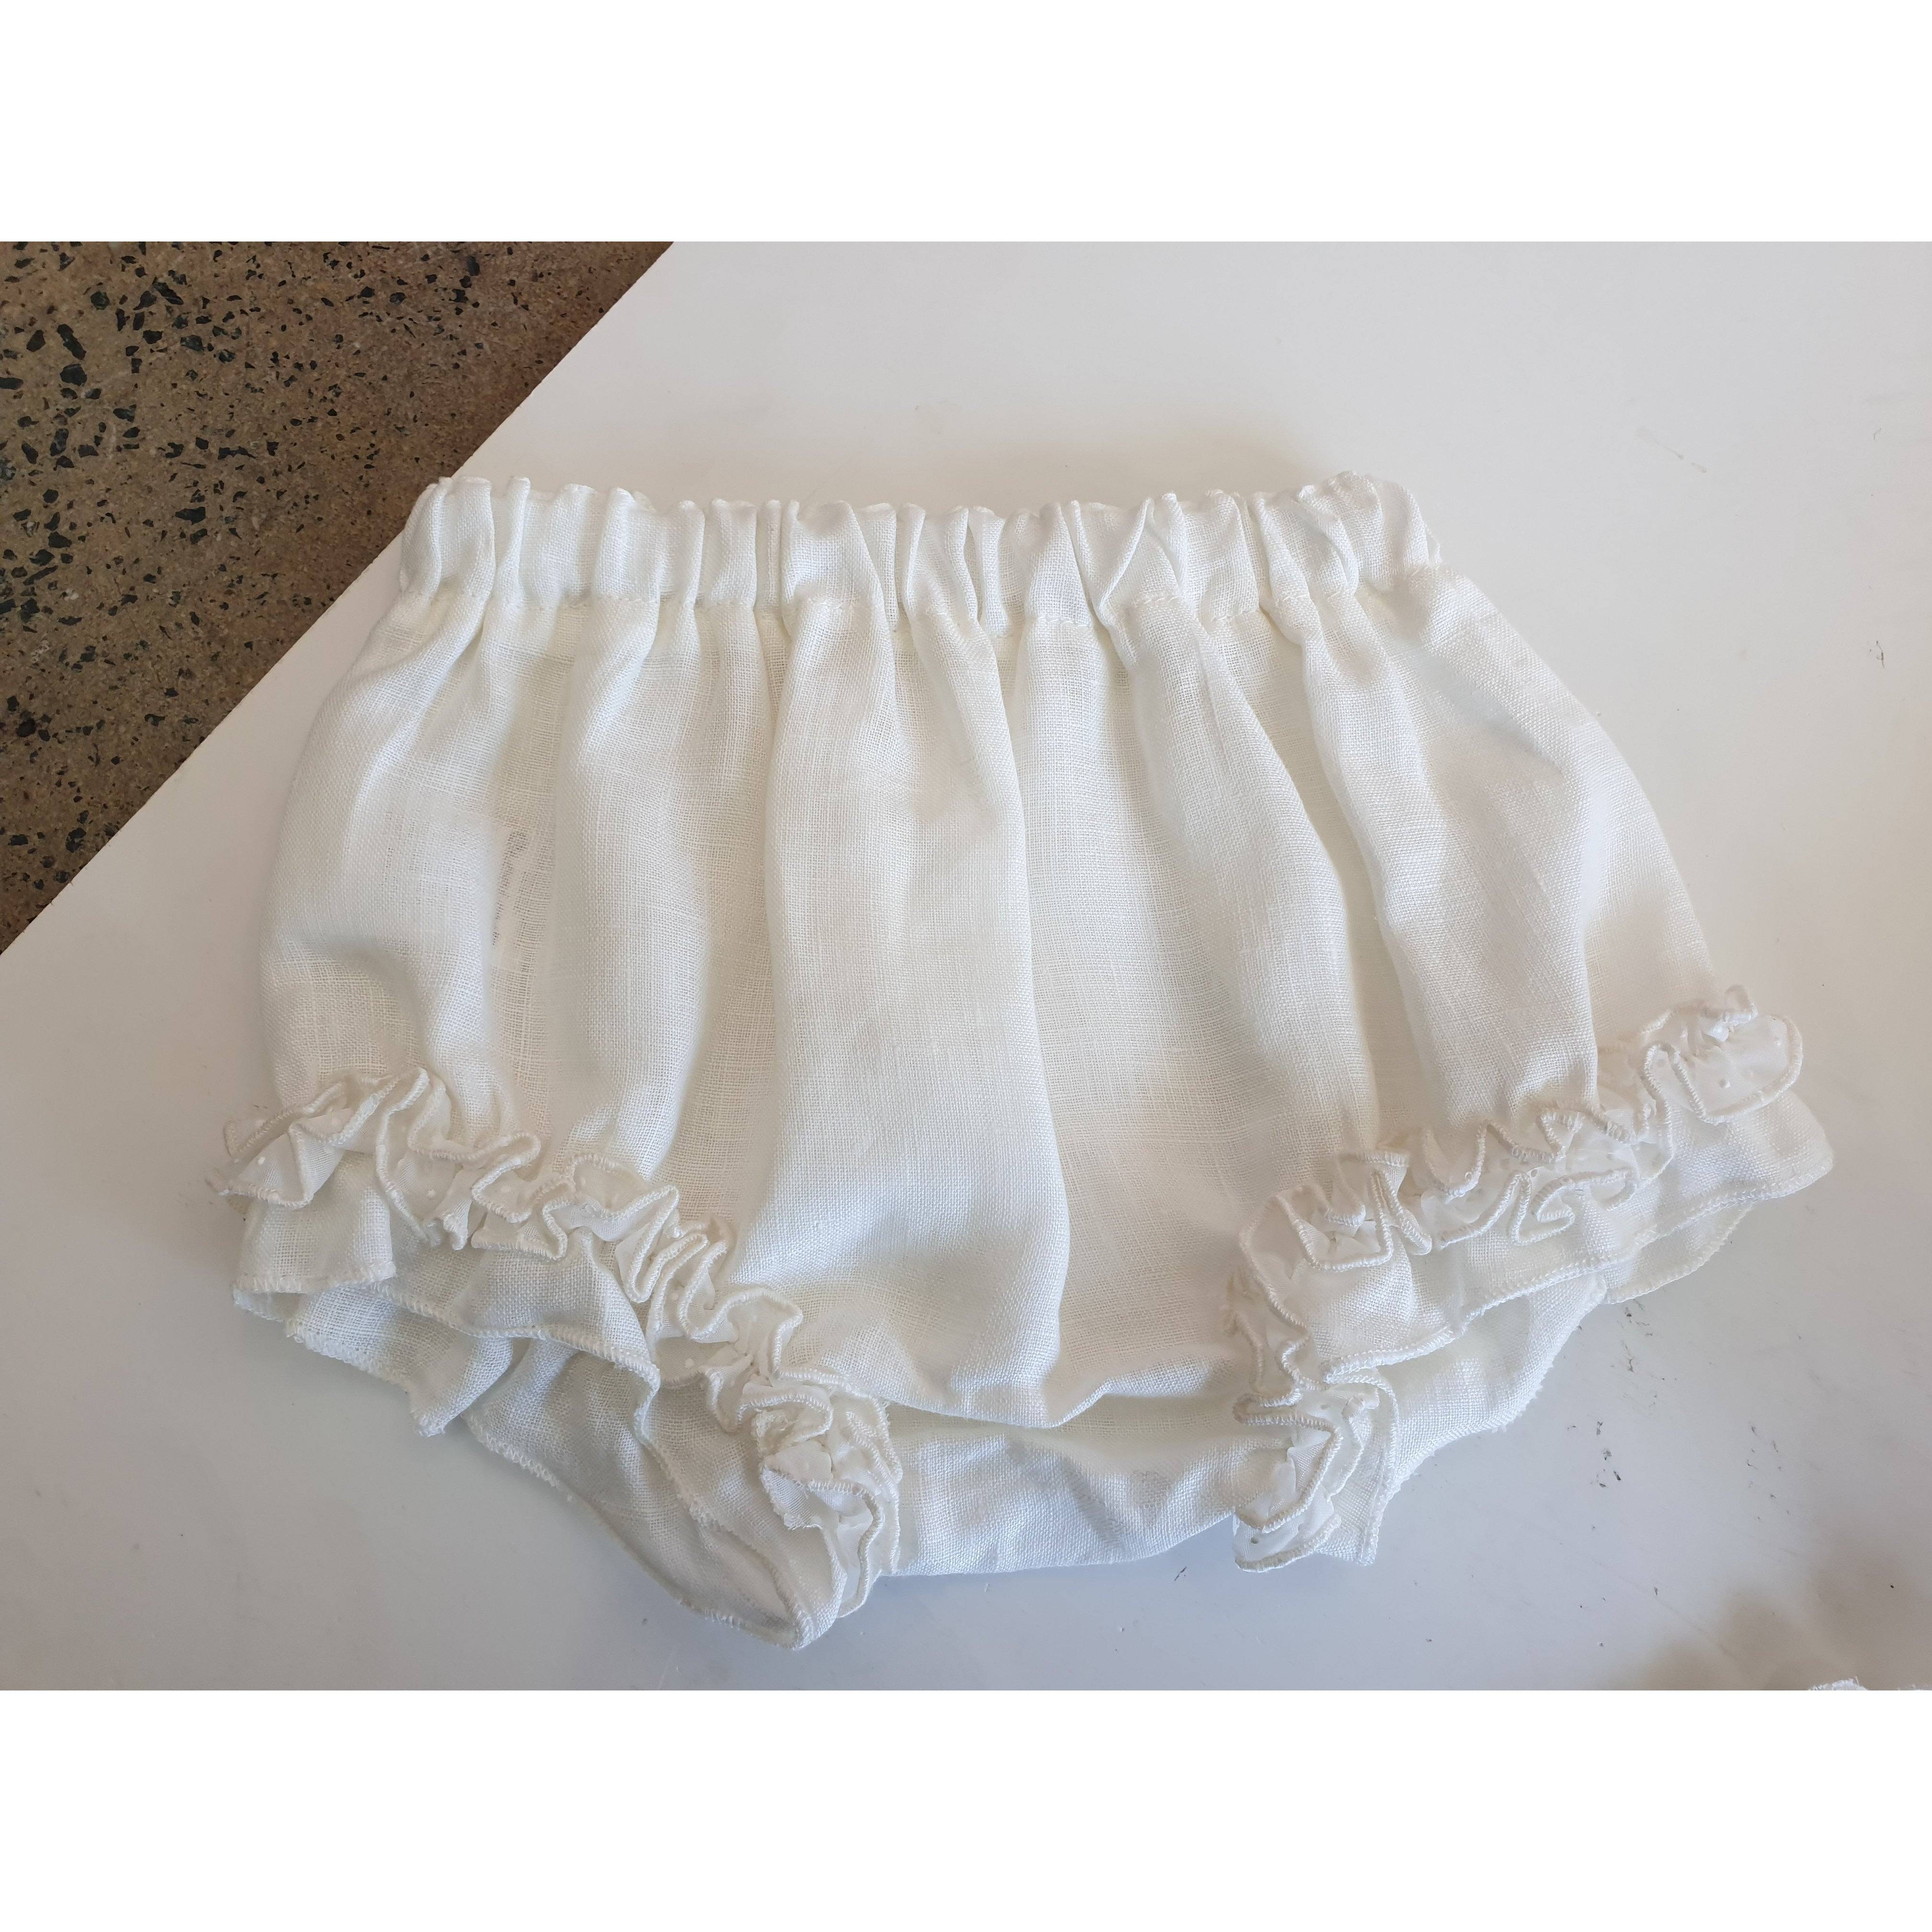 ROSEMARY BABY GIRL DRESS AND BLOOMERS